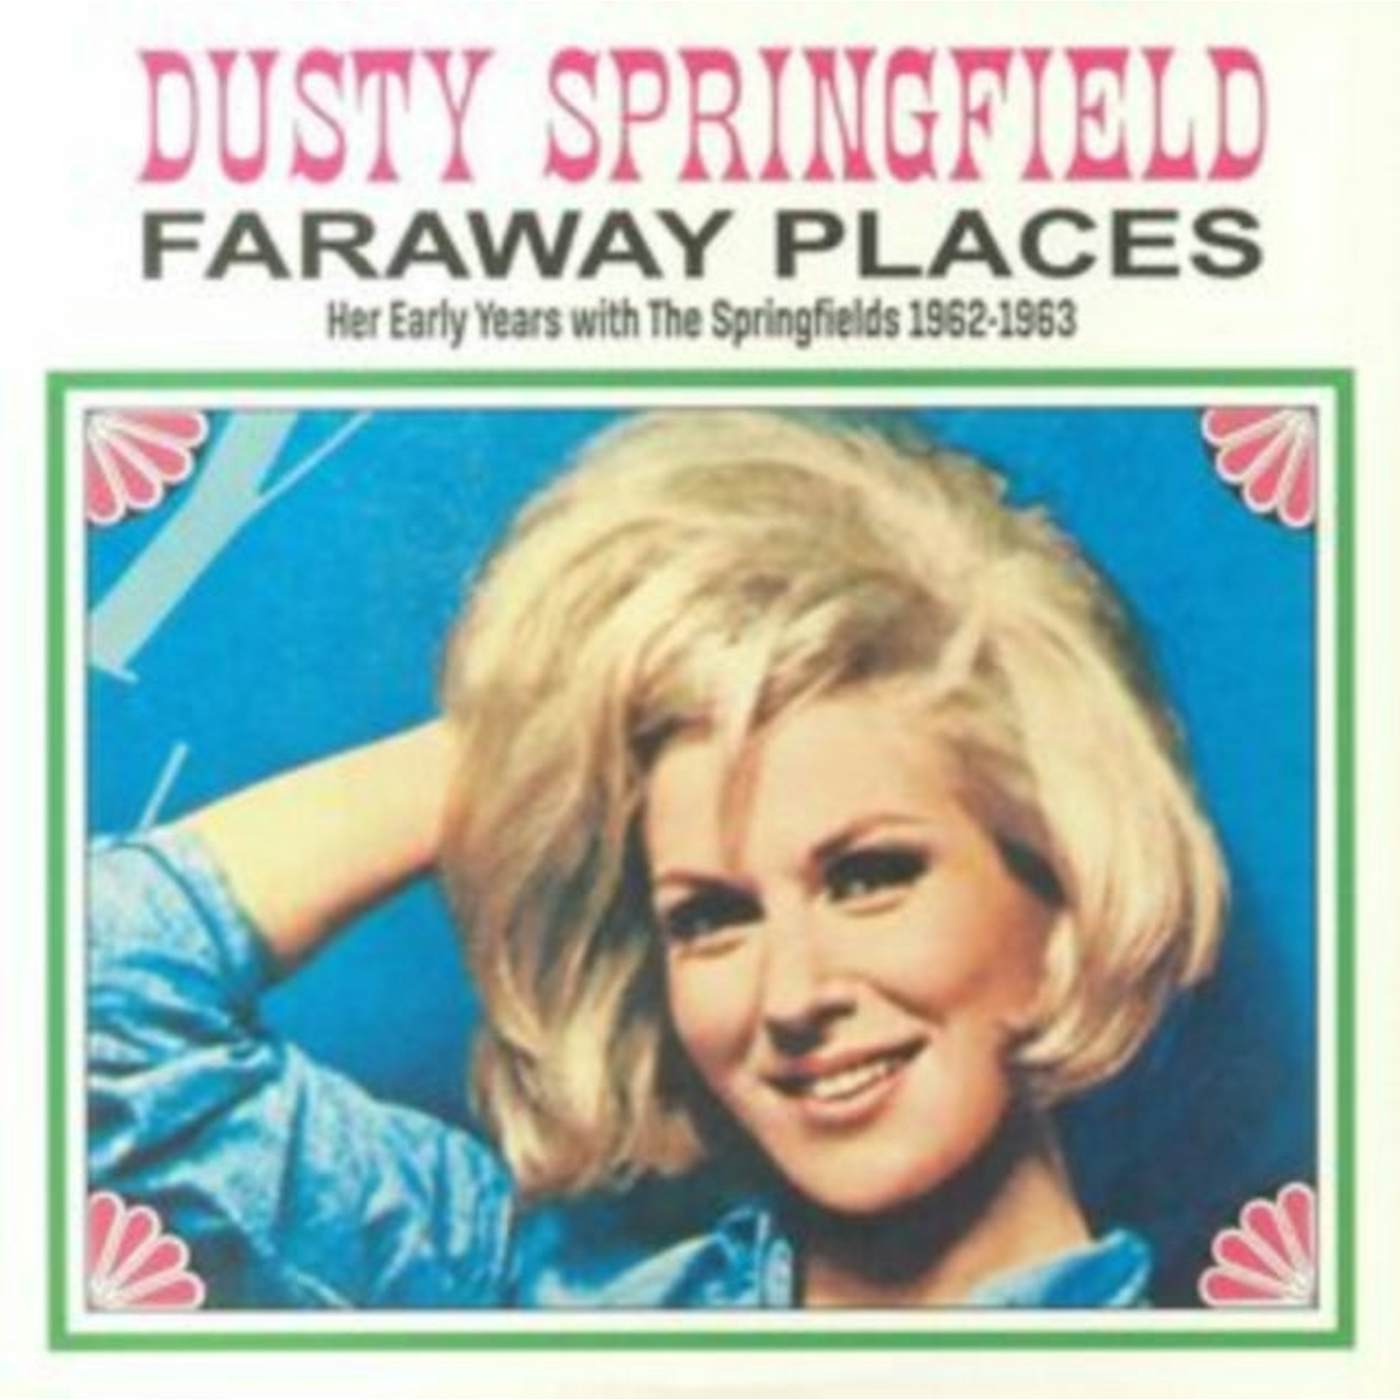 Dusty Springfield LP - Far Away Places: Her Early Years With The Springfields 1962-1963 (White Vinyl)